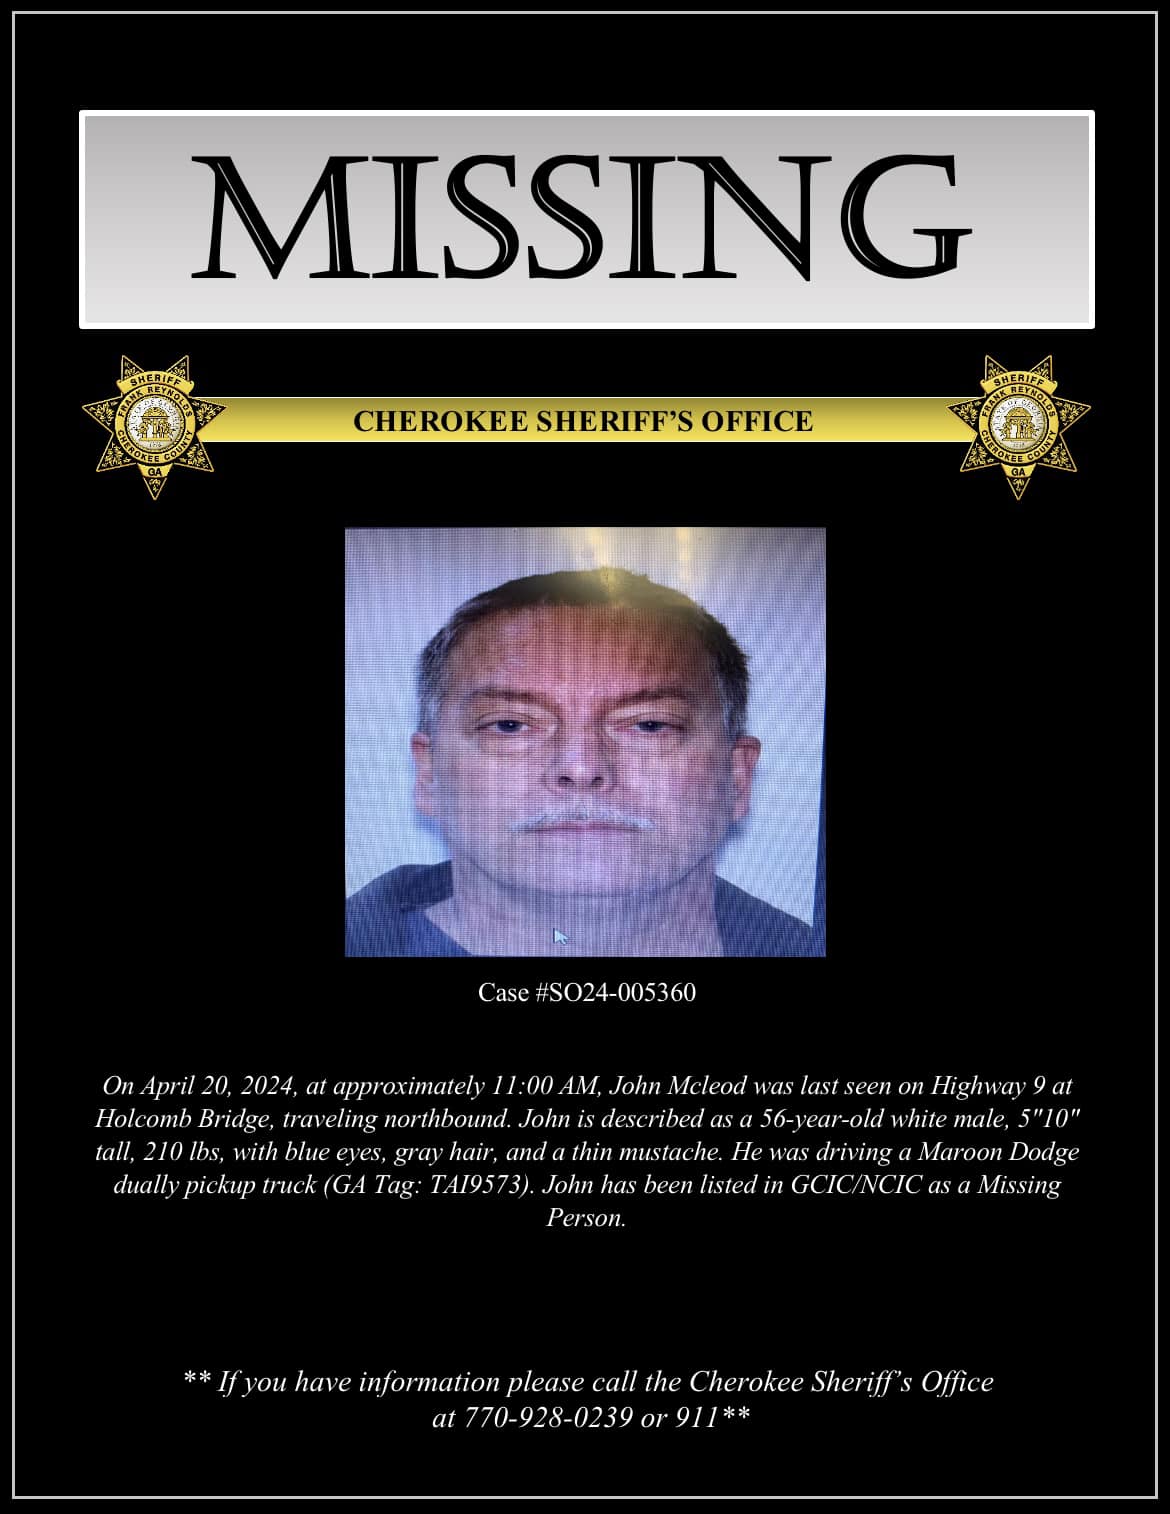 Search Underway for Missing Cherokee County Man Last Seen on Highway 9 in Roswell